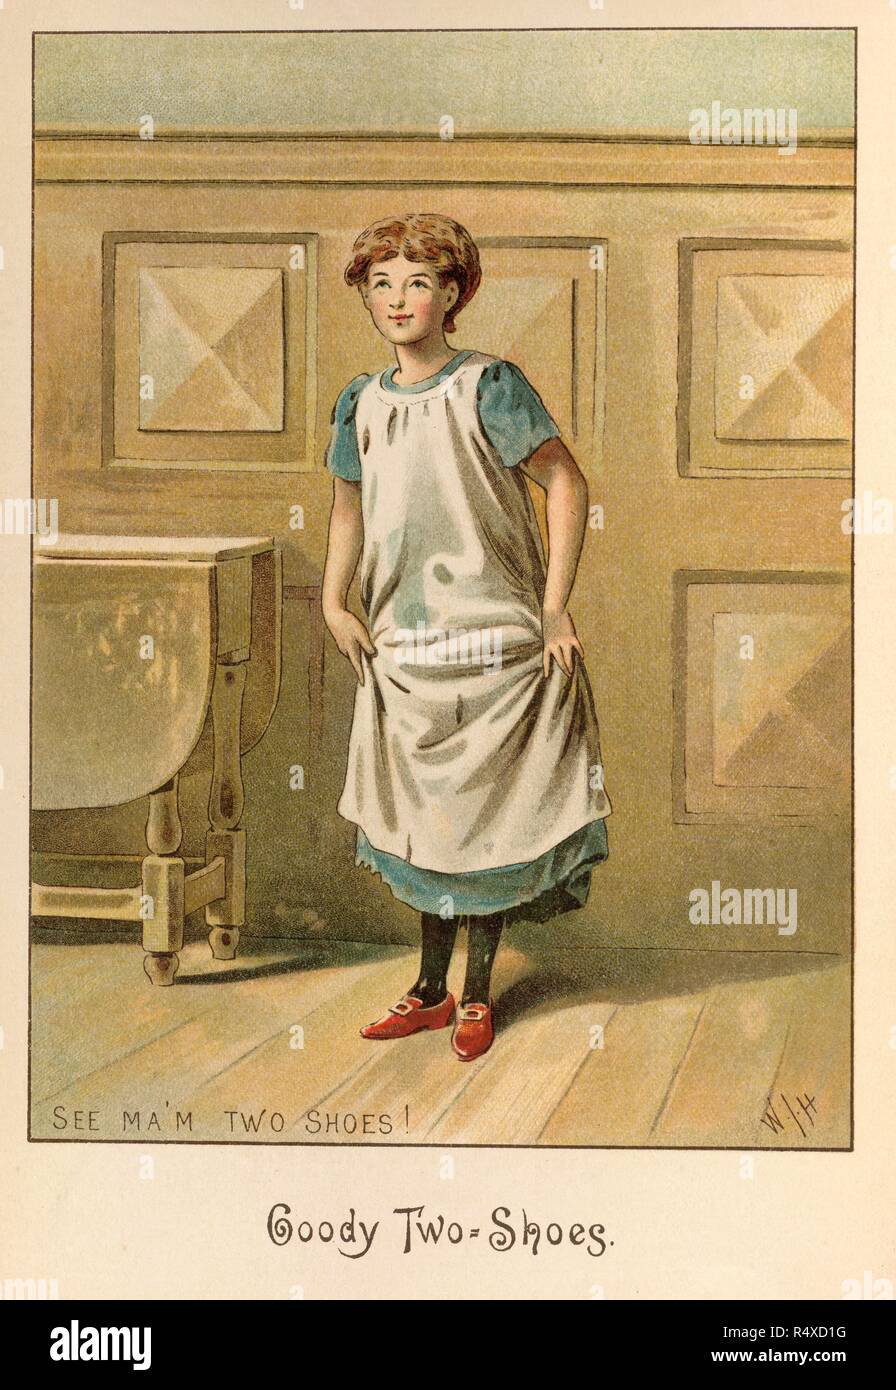 Goody Two Shoes. The History of Little Goody Two-shoes. London, 1891.  Source: 12800.f.45.(8) frontispiece. Language: English. Author: Hodgson, W.  J Stock Photo - Alamy